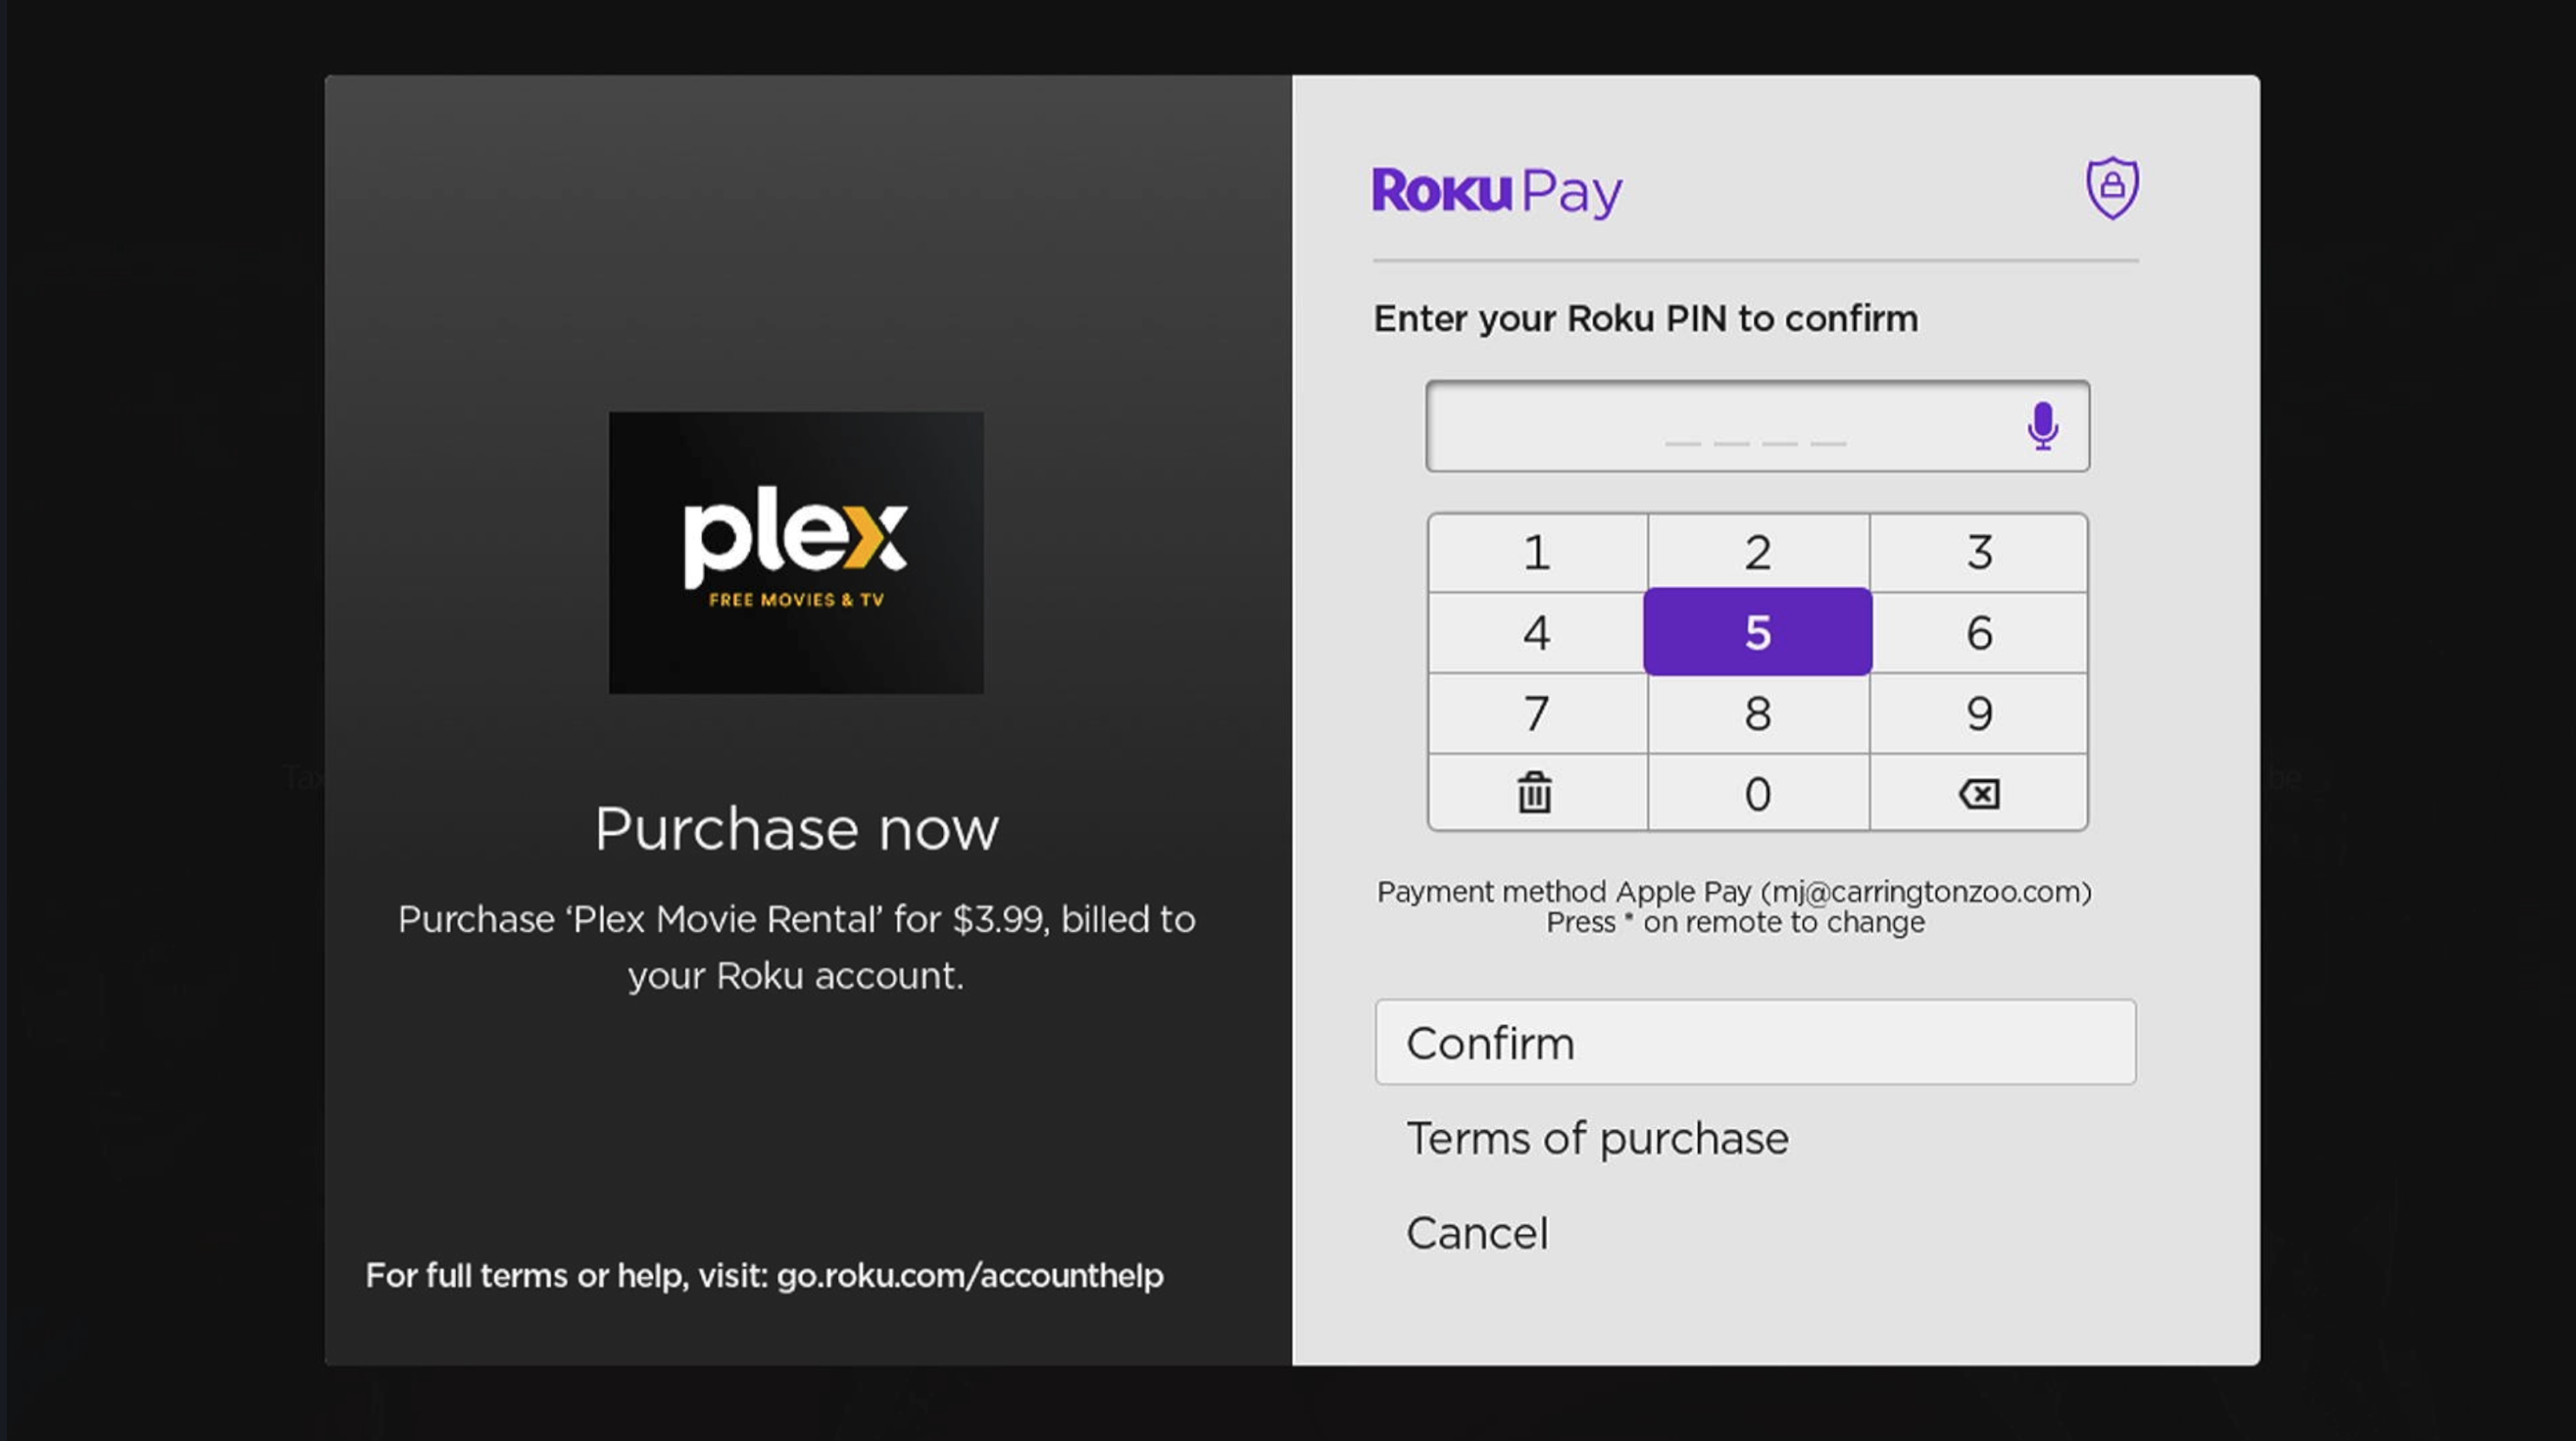 Roku app, showing a rental purchase confirmation page titled Purchase now. It indicates that $3.99 will be billed to the user's Roku account and prompts the user to enter their Roku PIN to select the Confirm button and complete the rental purchase.